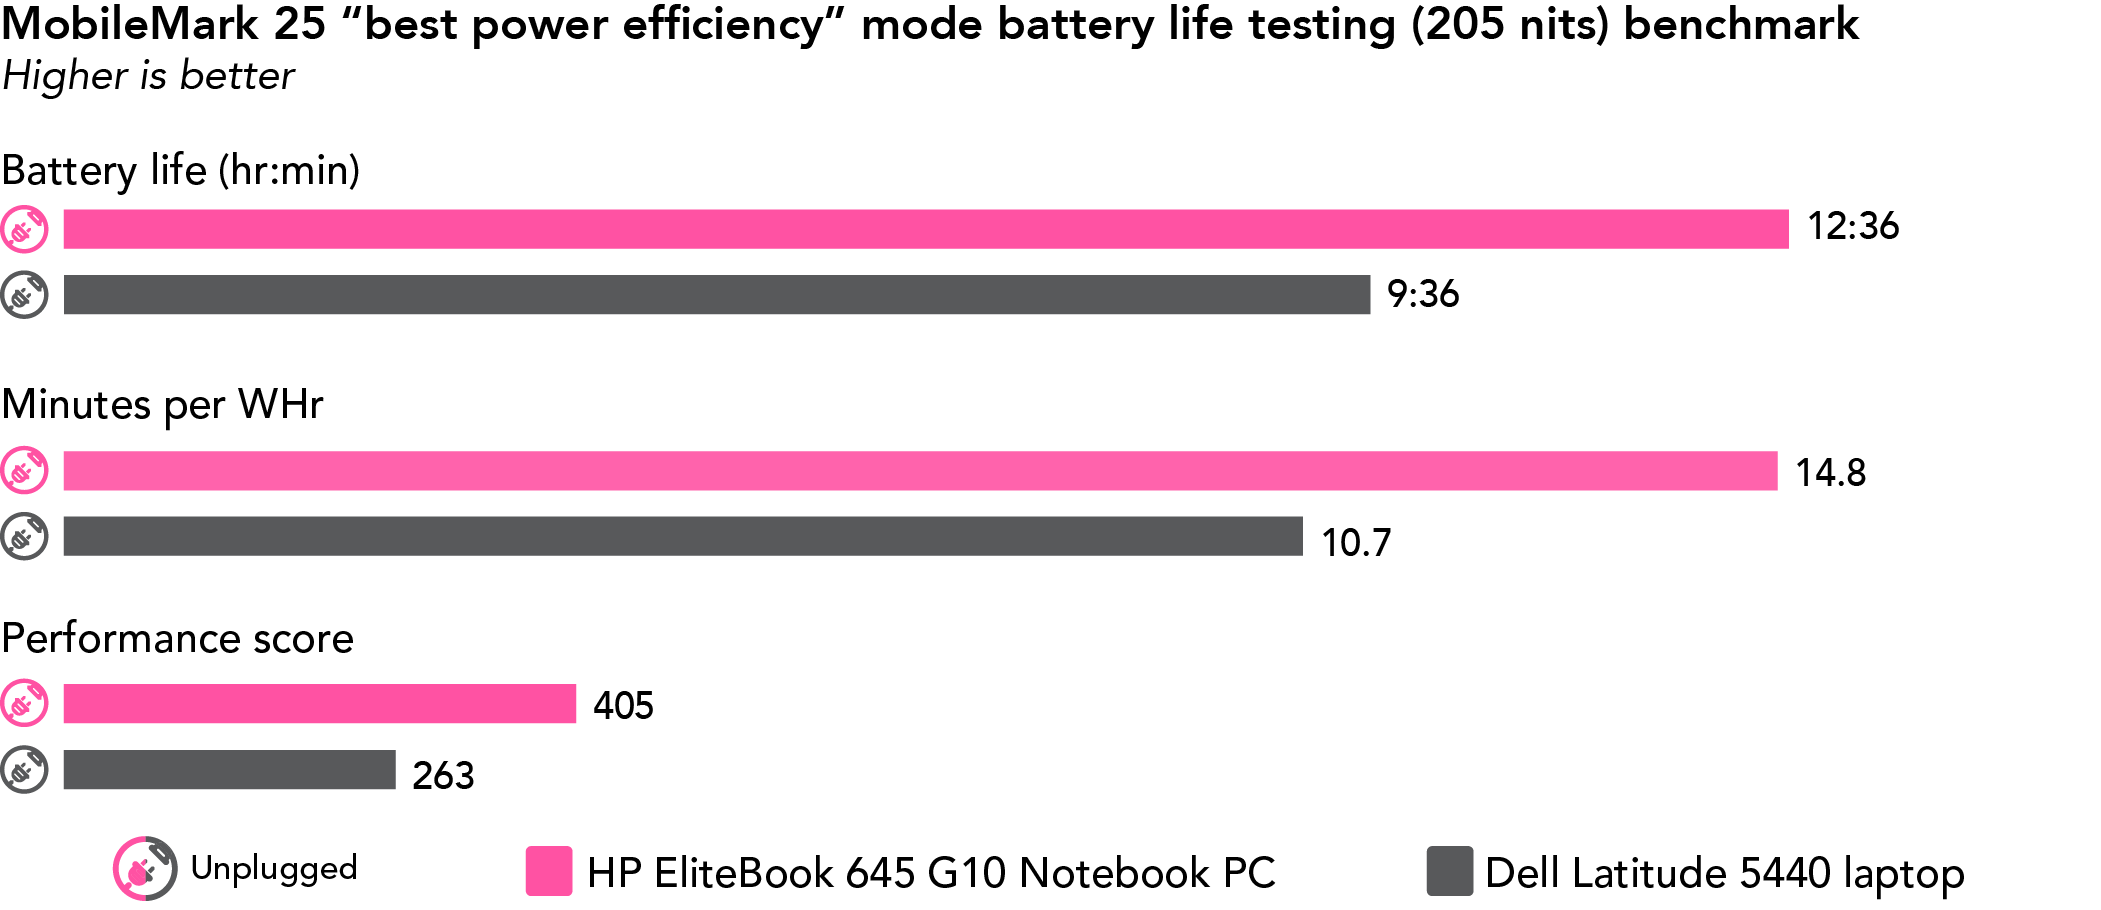 Chart of MobileMark 25 “best power efficiency” mode battery life testing (205 nits) benchmark results. Higher is better. HP EliteBook 645 G10 Notebook PC has 12 hours and 36 minutes of battery life, 14.8 minutes per WHr, and a 405 performance score. Dell Latitude 5440 laptop has 9 hours and 36 minutes of battery life, 10.7 minutes per WHr, and a 263 performance score.